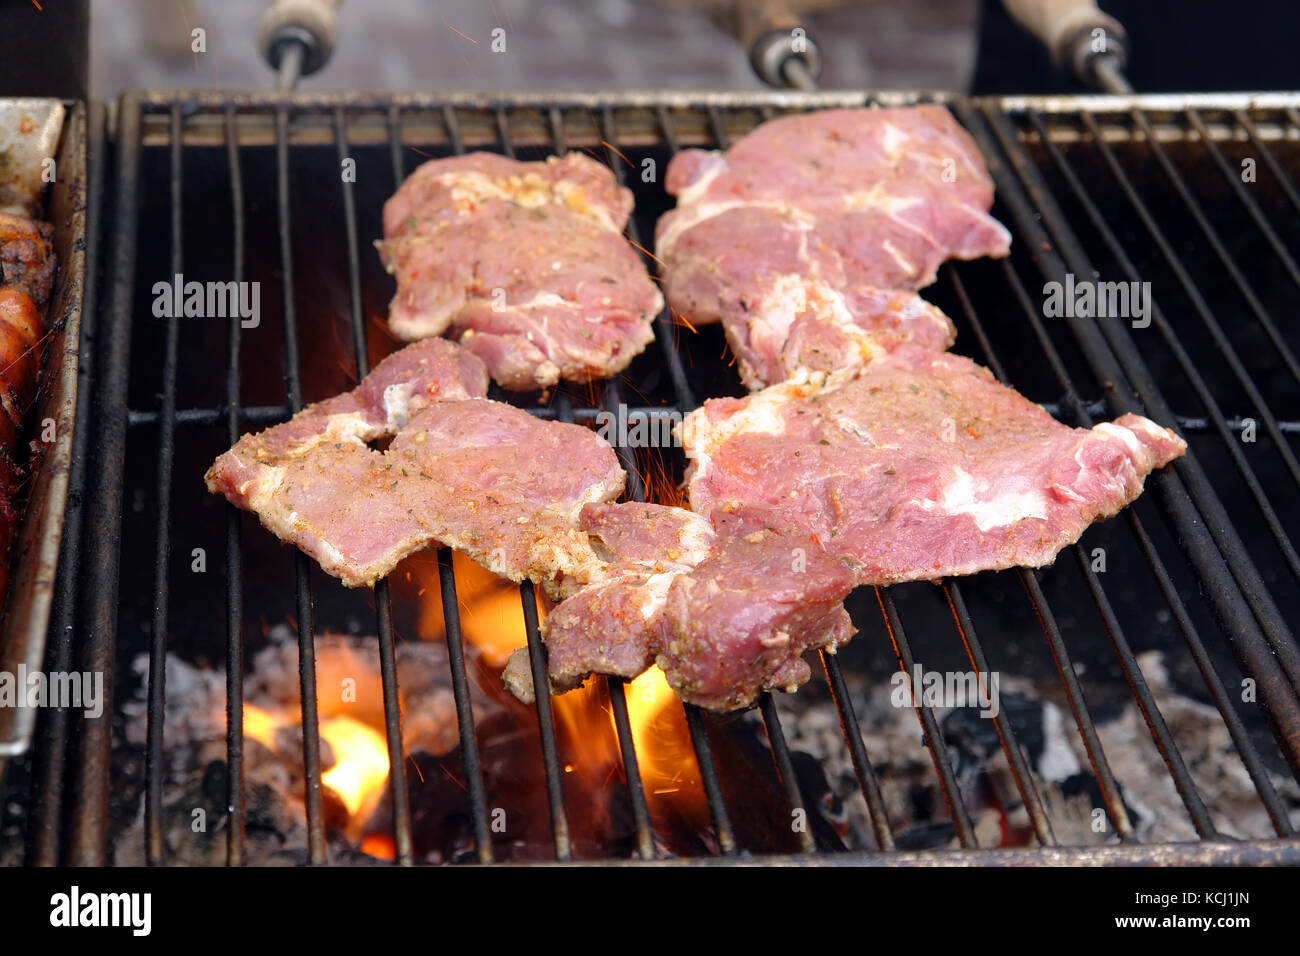 Red meat chops put on the barbecue set on fire Stock Photo